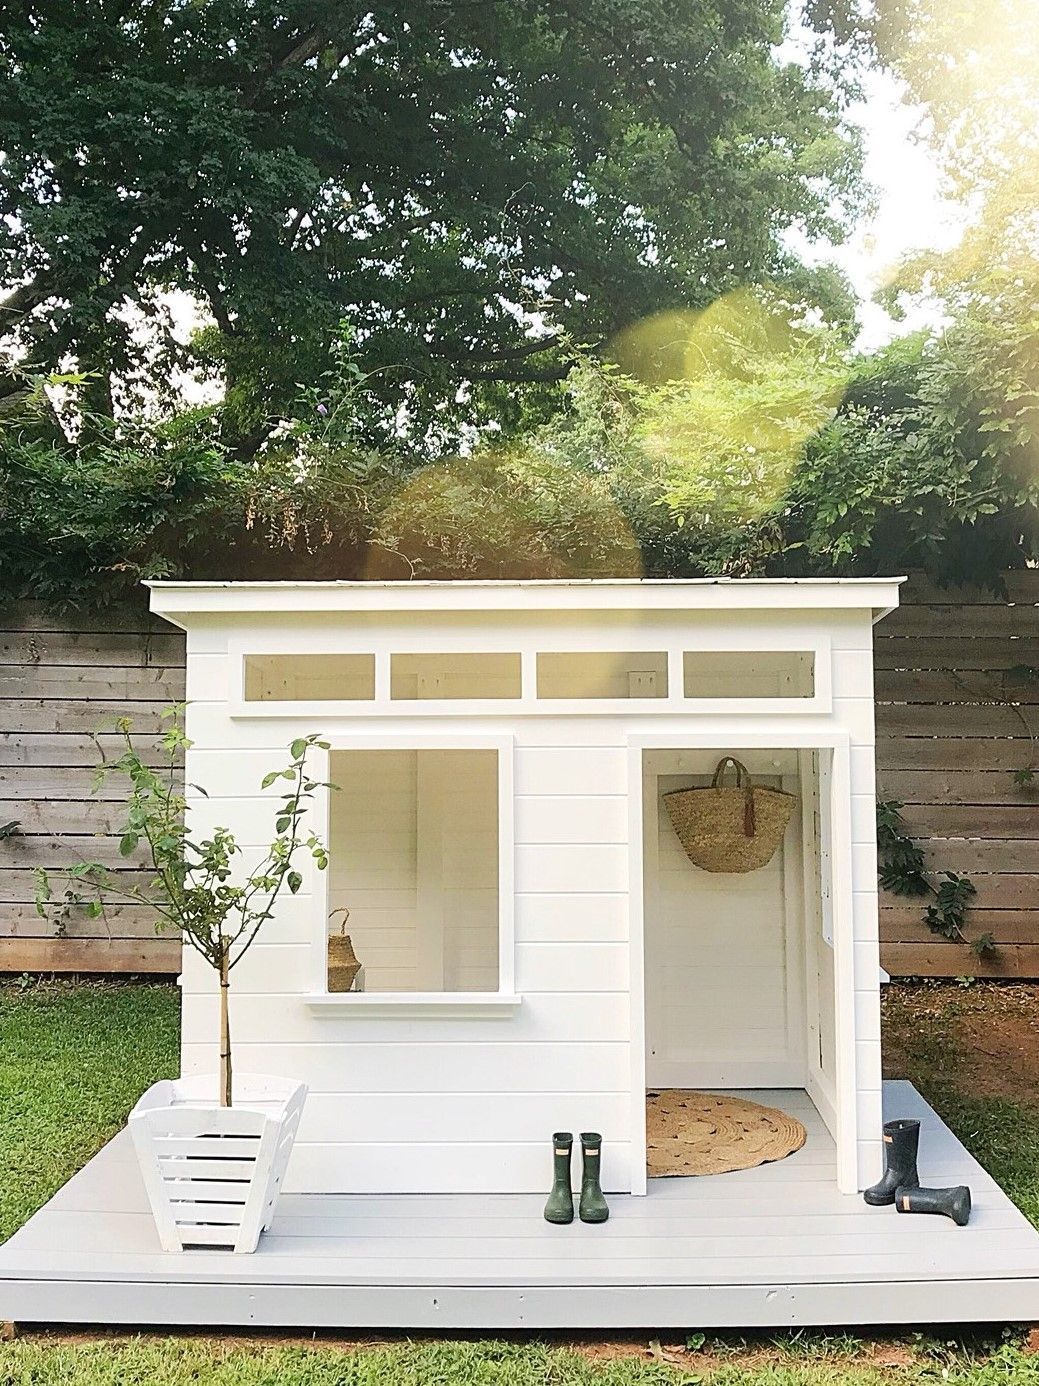 Adorable Modern Playhouse by @michellecannonsmith — iron & twine - Adorable Modern Playhouse by @michellecannonsmith — iron & twine -   18 diy Kids house ideas